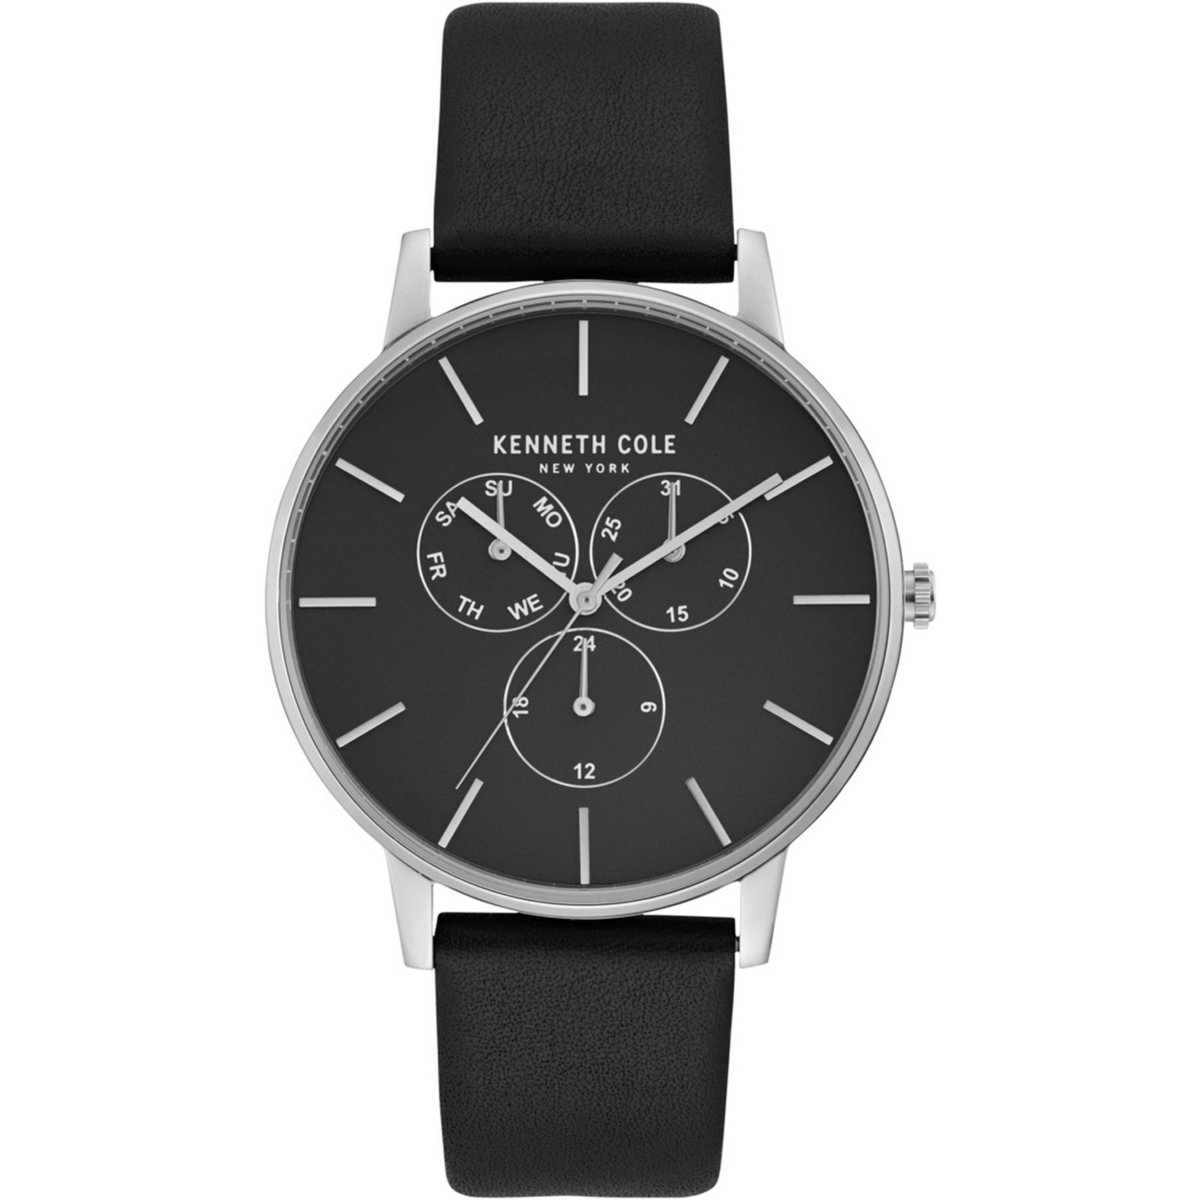 Kenneth Cole Men's Chronograph Watch KC50008001